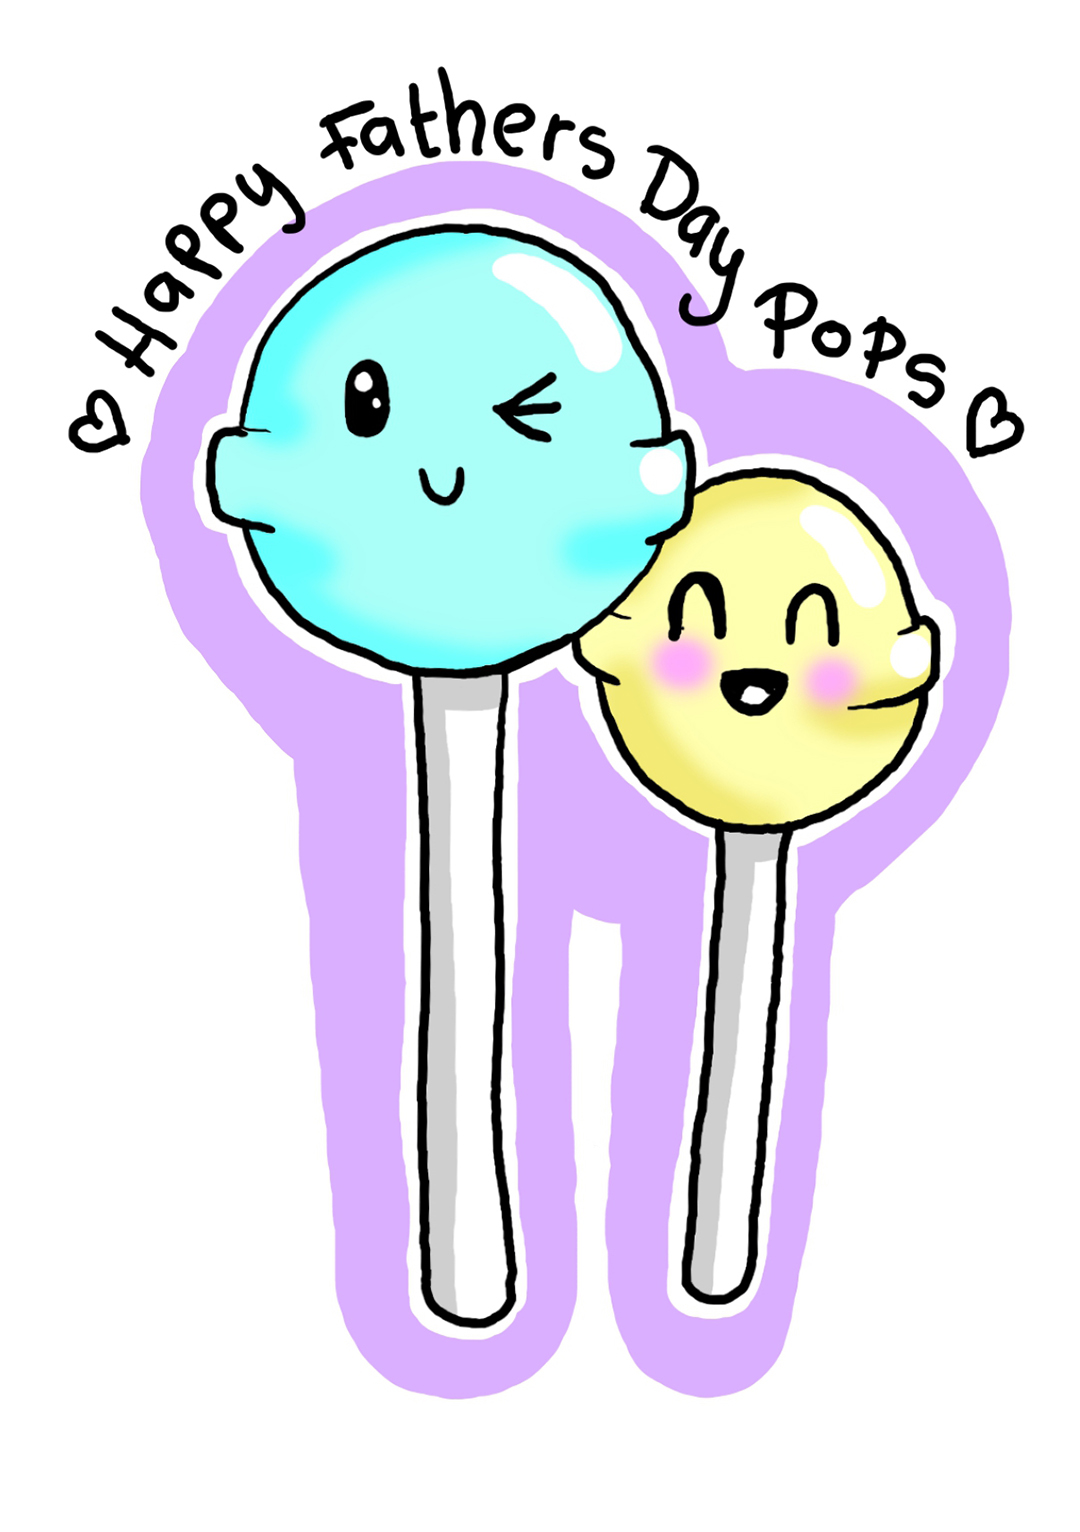 Happy Father's Day Pops! - Cute Lollipop Card